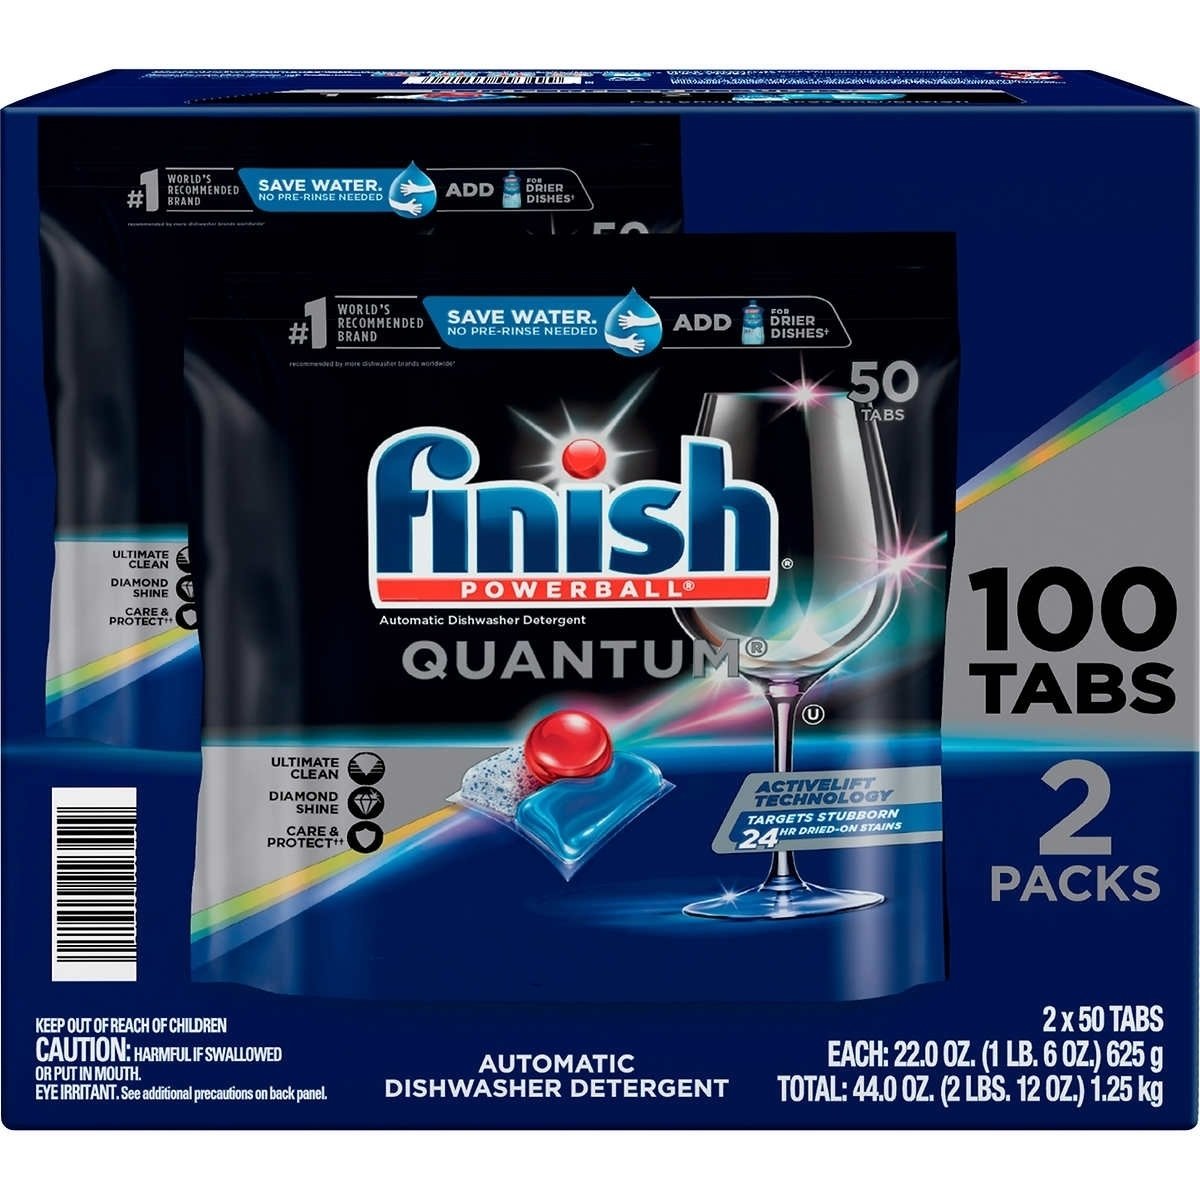 Finish Powerball Quantum Dishwasher Detergent, 50 Tabs (Pack Of 2)